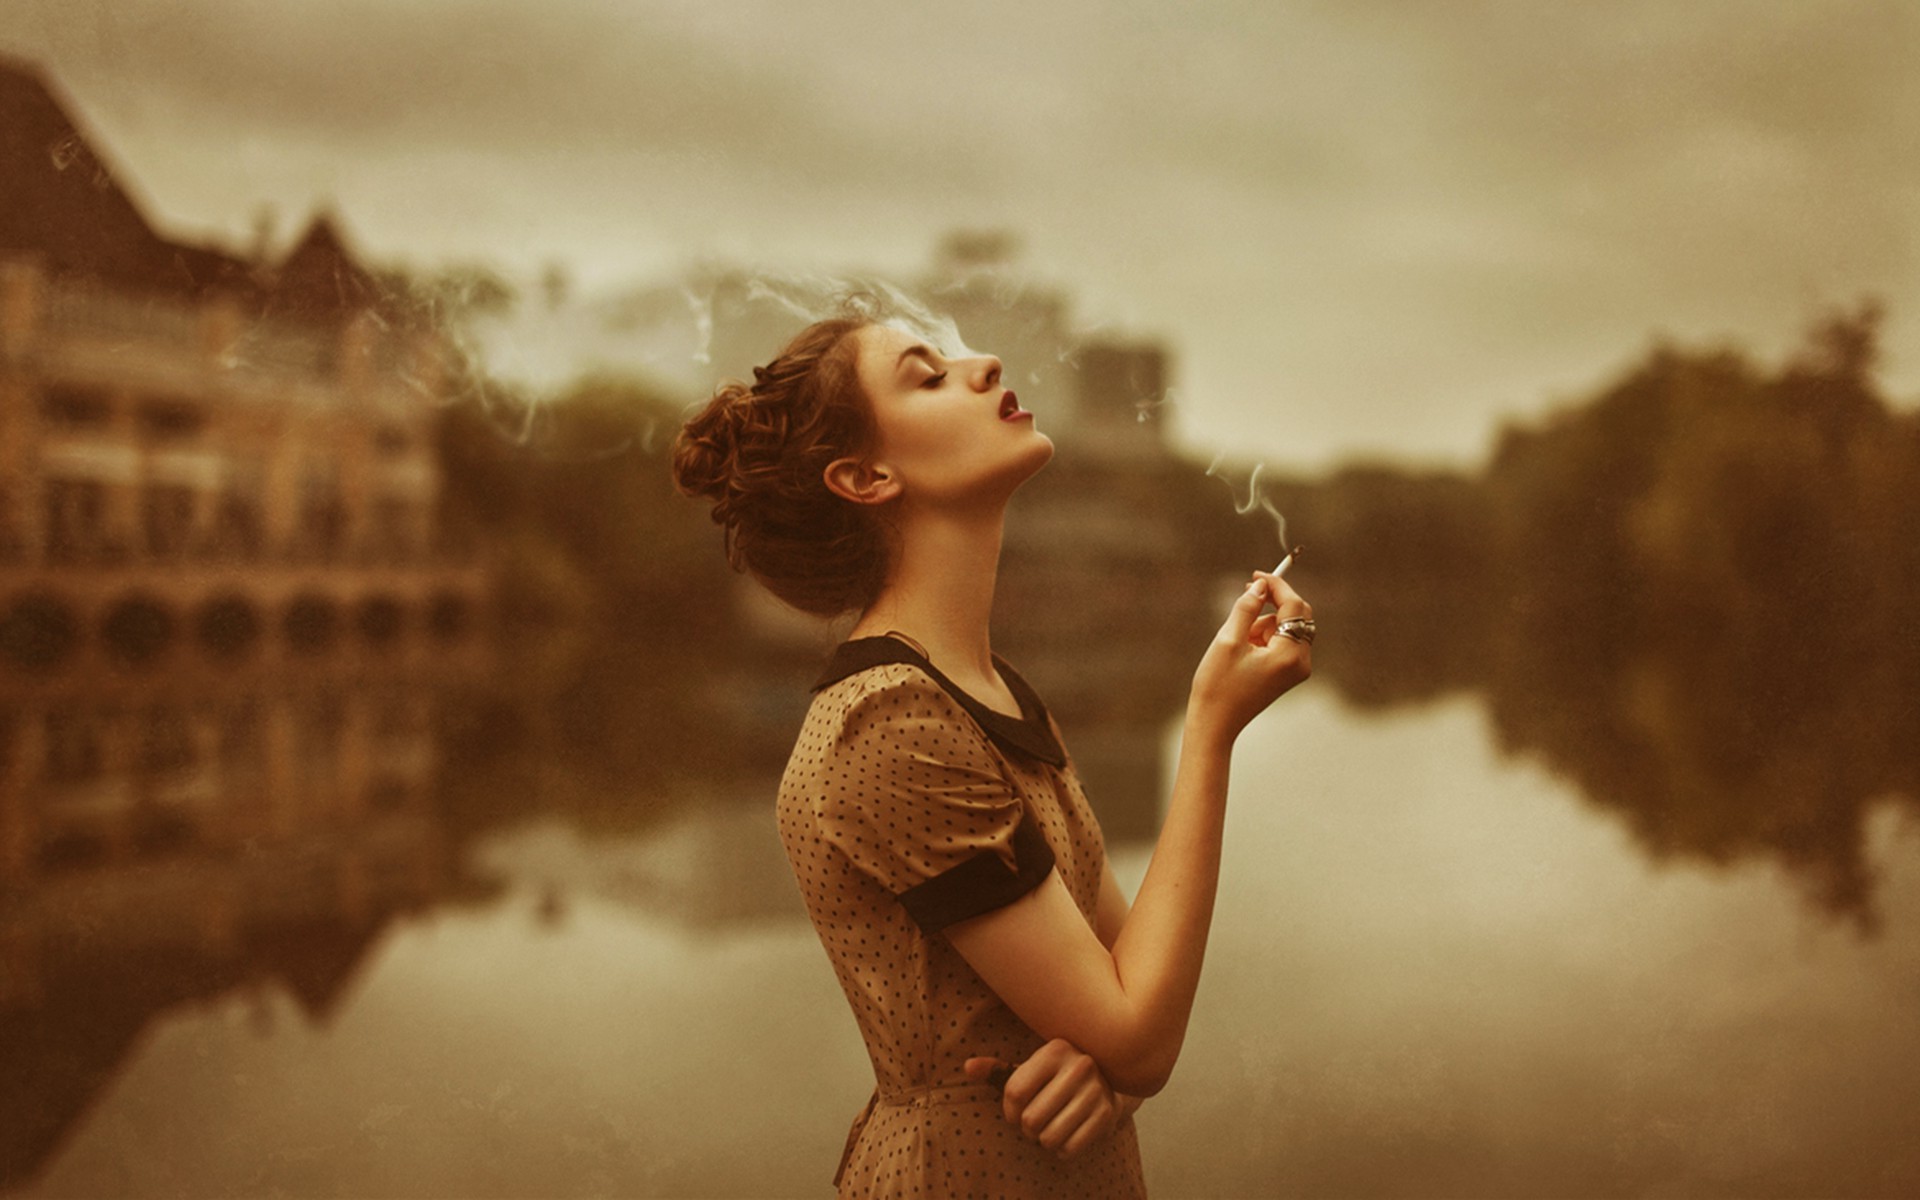 smoking, Women Outdoors, Polka Dots, Cigarettes, Closed Eyes, Looking Up, Hair Bun, Women, Sepia, Arms On Chest Wallpaper